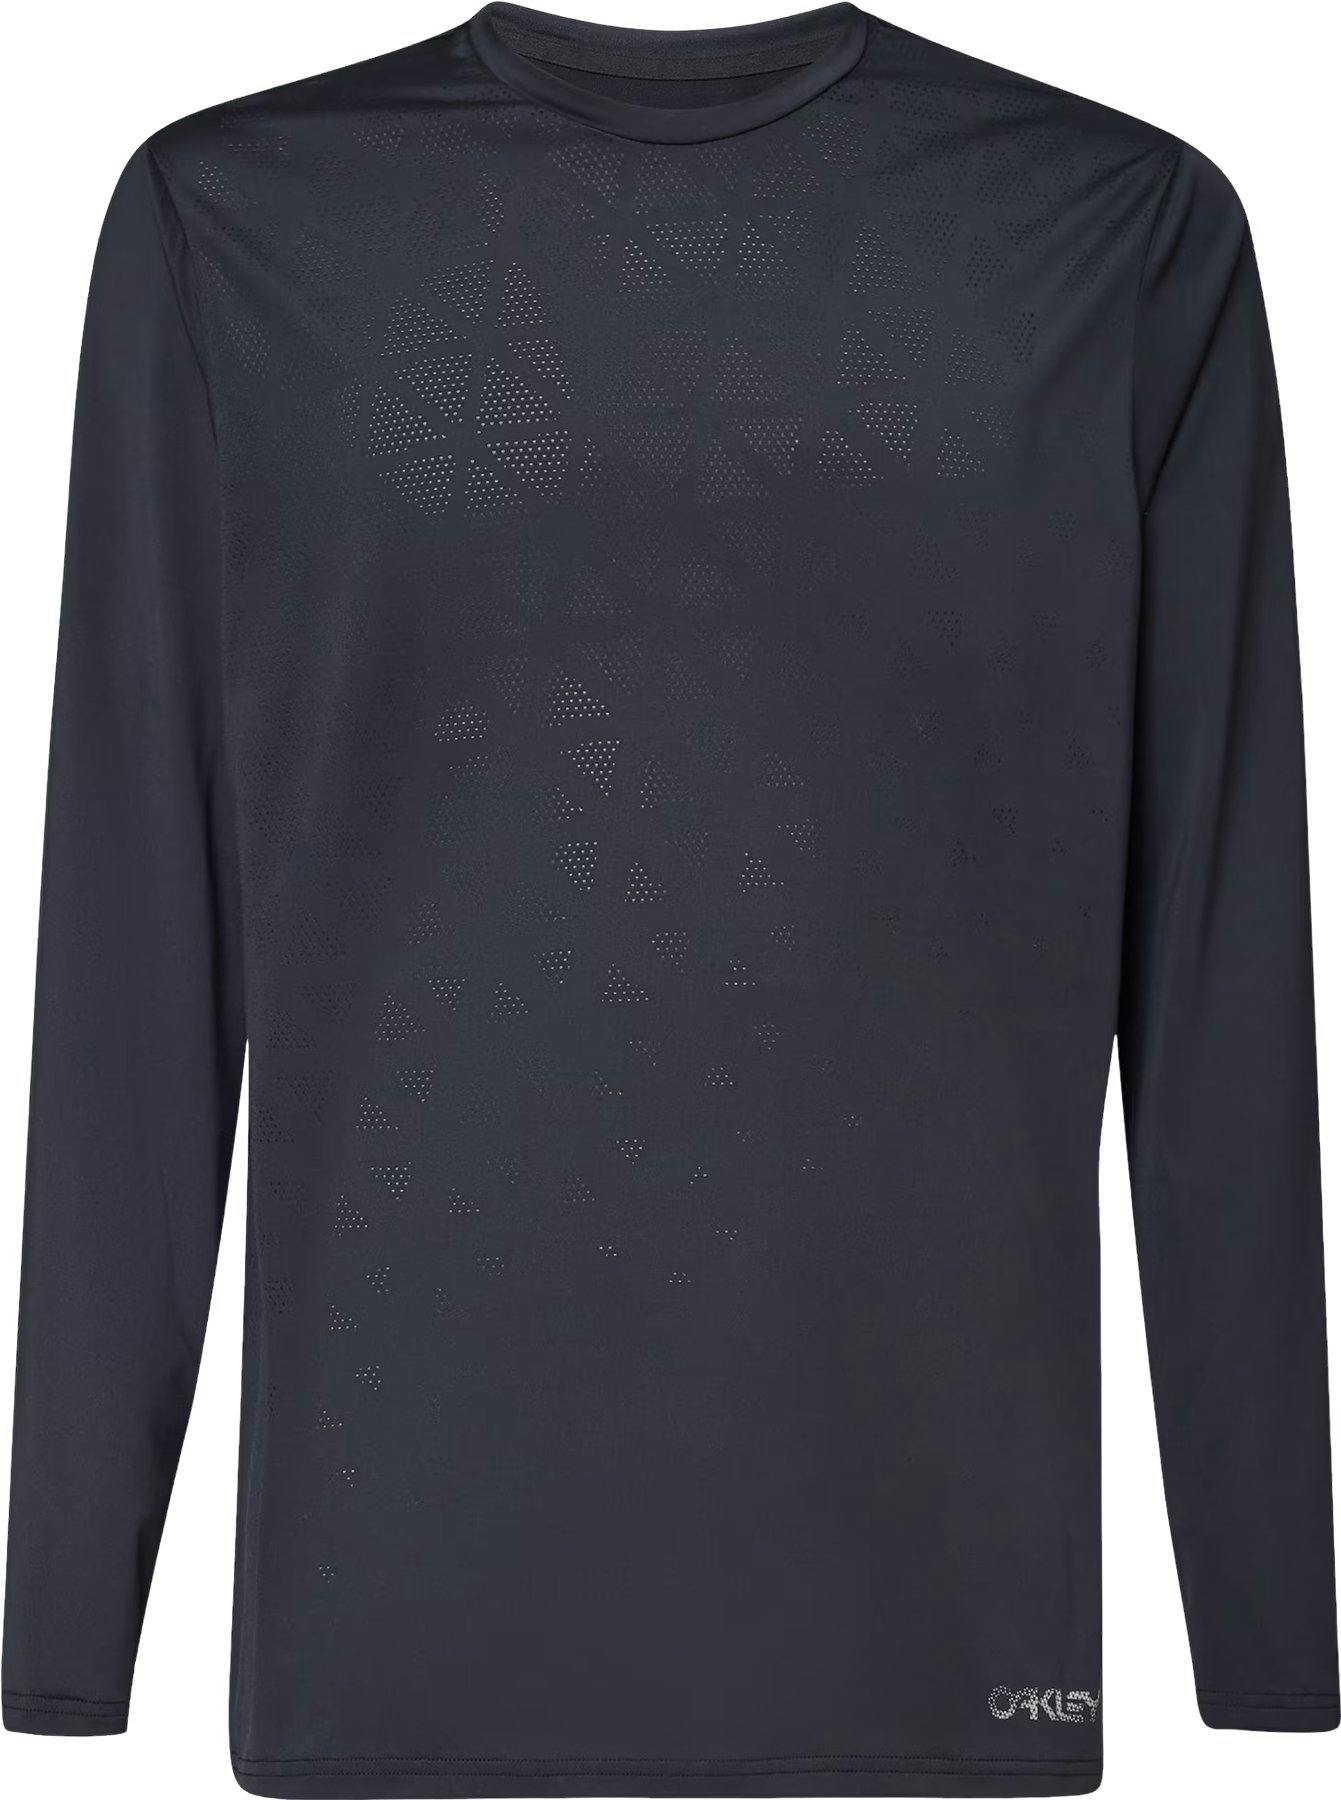 Product image for Berm Long Sleeve Jersey - Men's